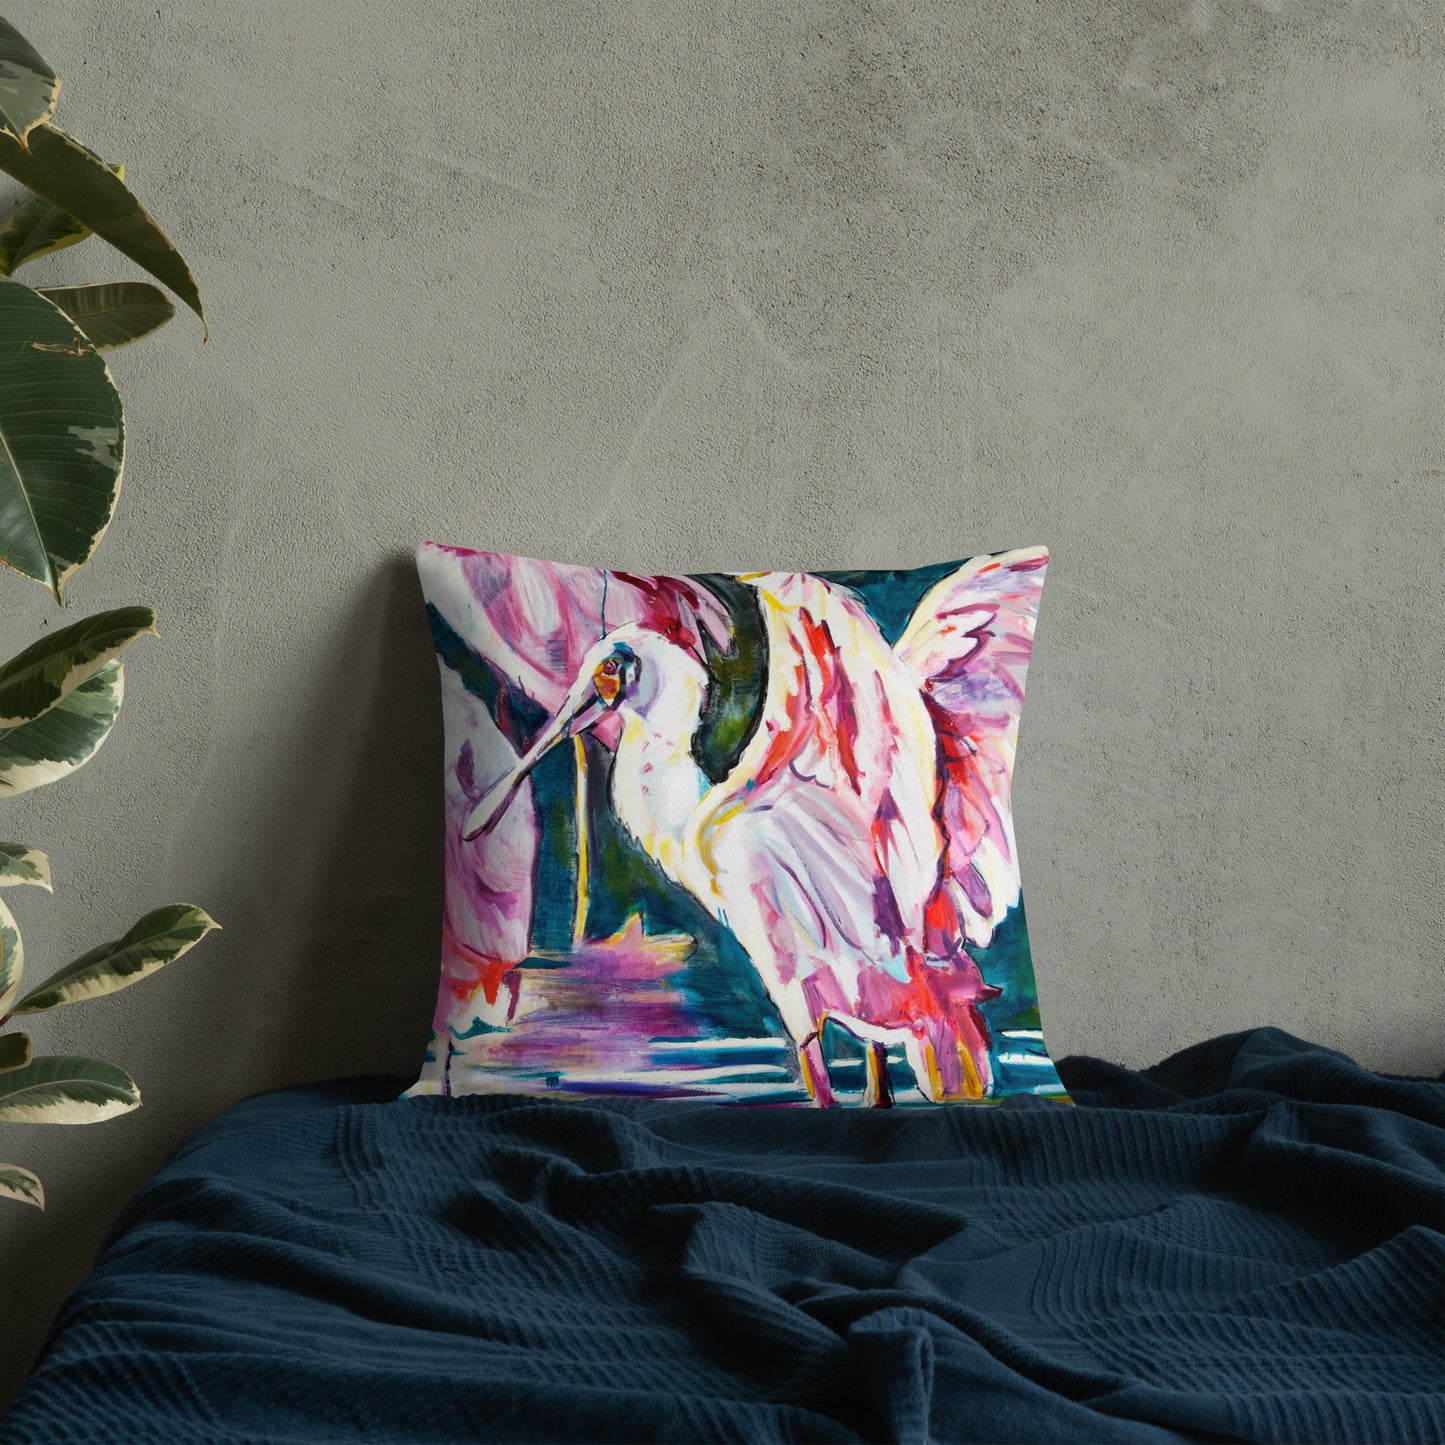 Roseate Spoonbill with Her ❤️ Open Premium Pillow